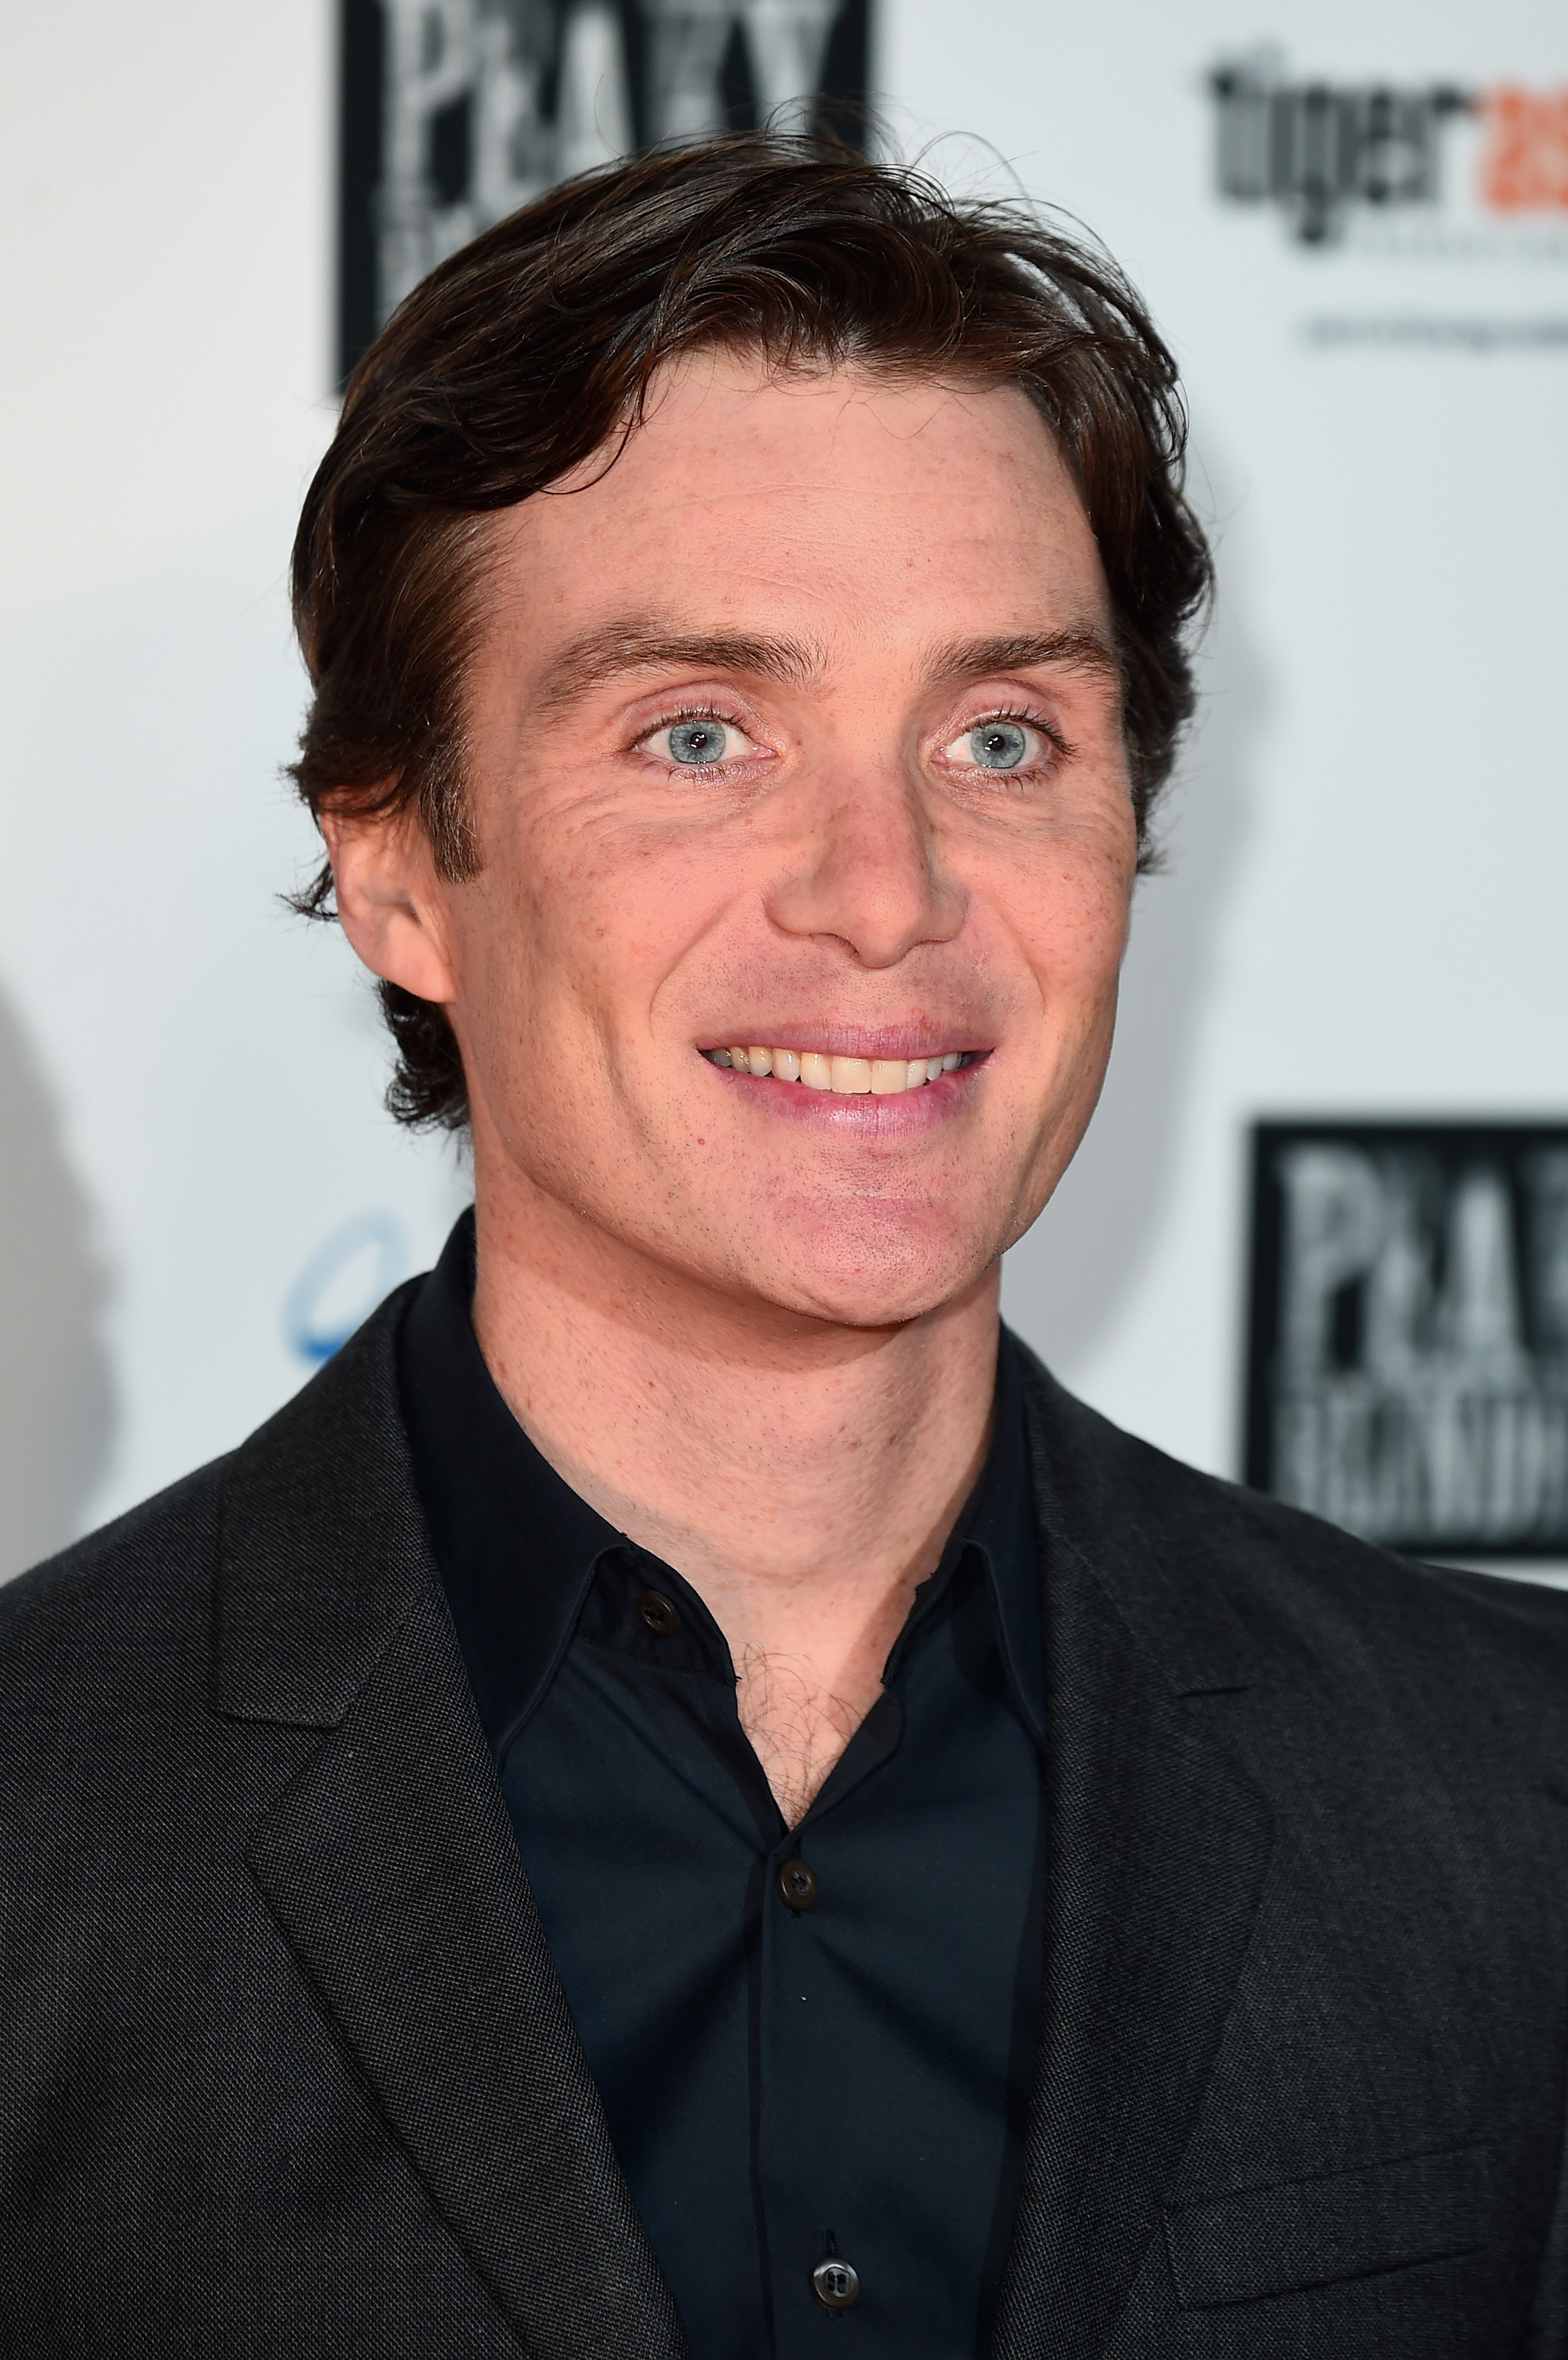 Cillian Murphy attends the premiere of "Peaky Blinders" on October 30, 2017 in Birmingham, England | Source: Getty Images